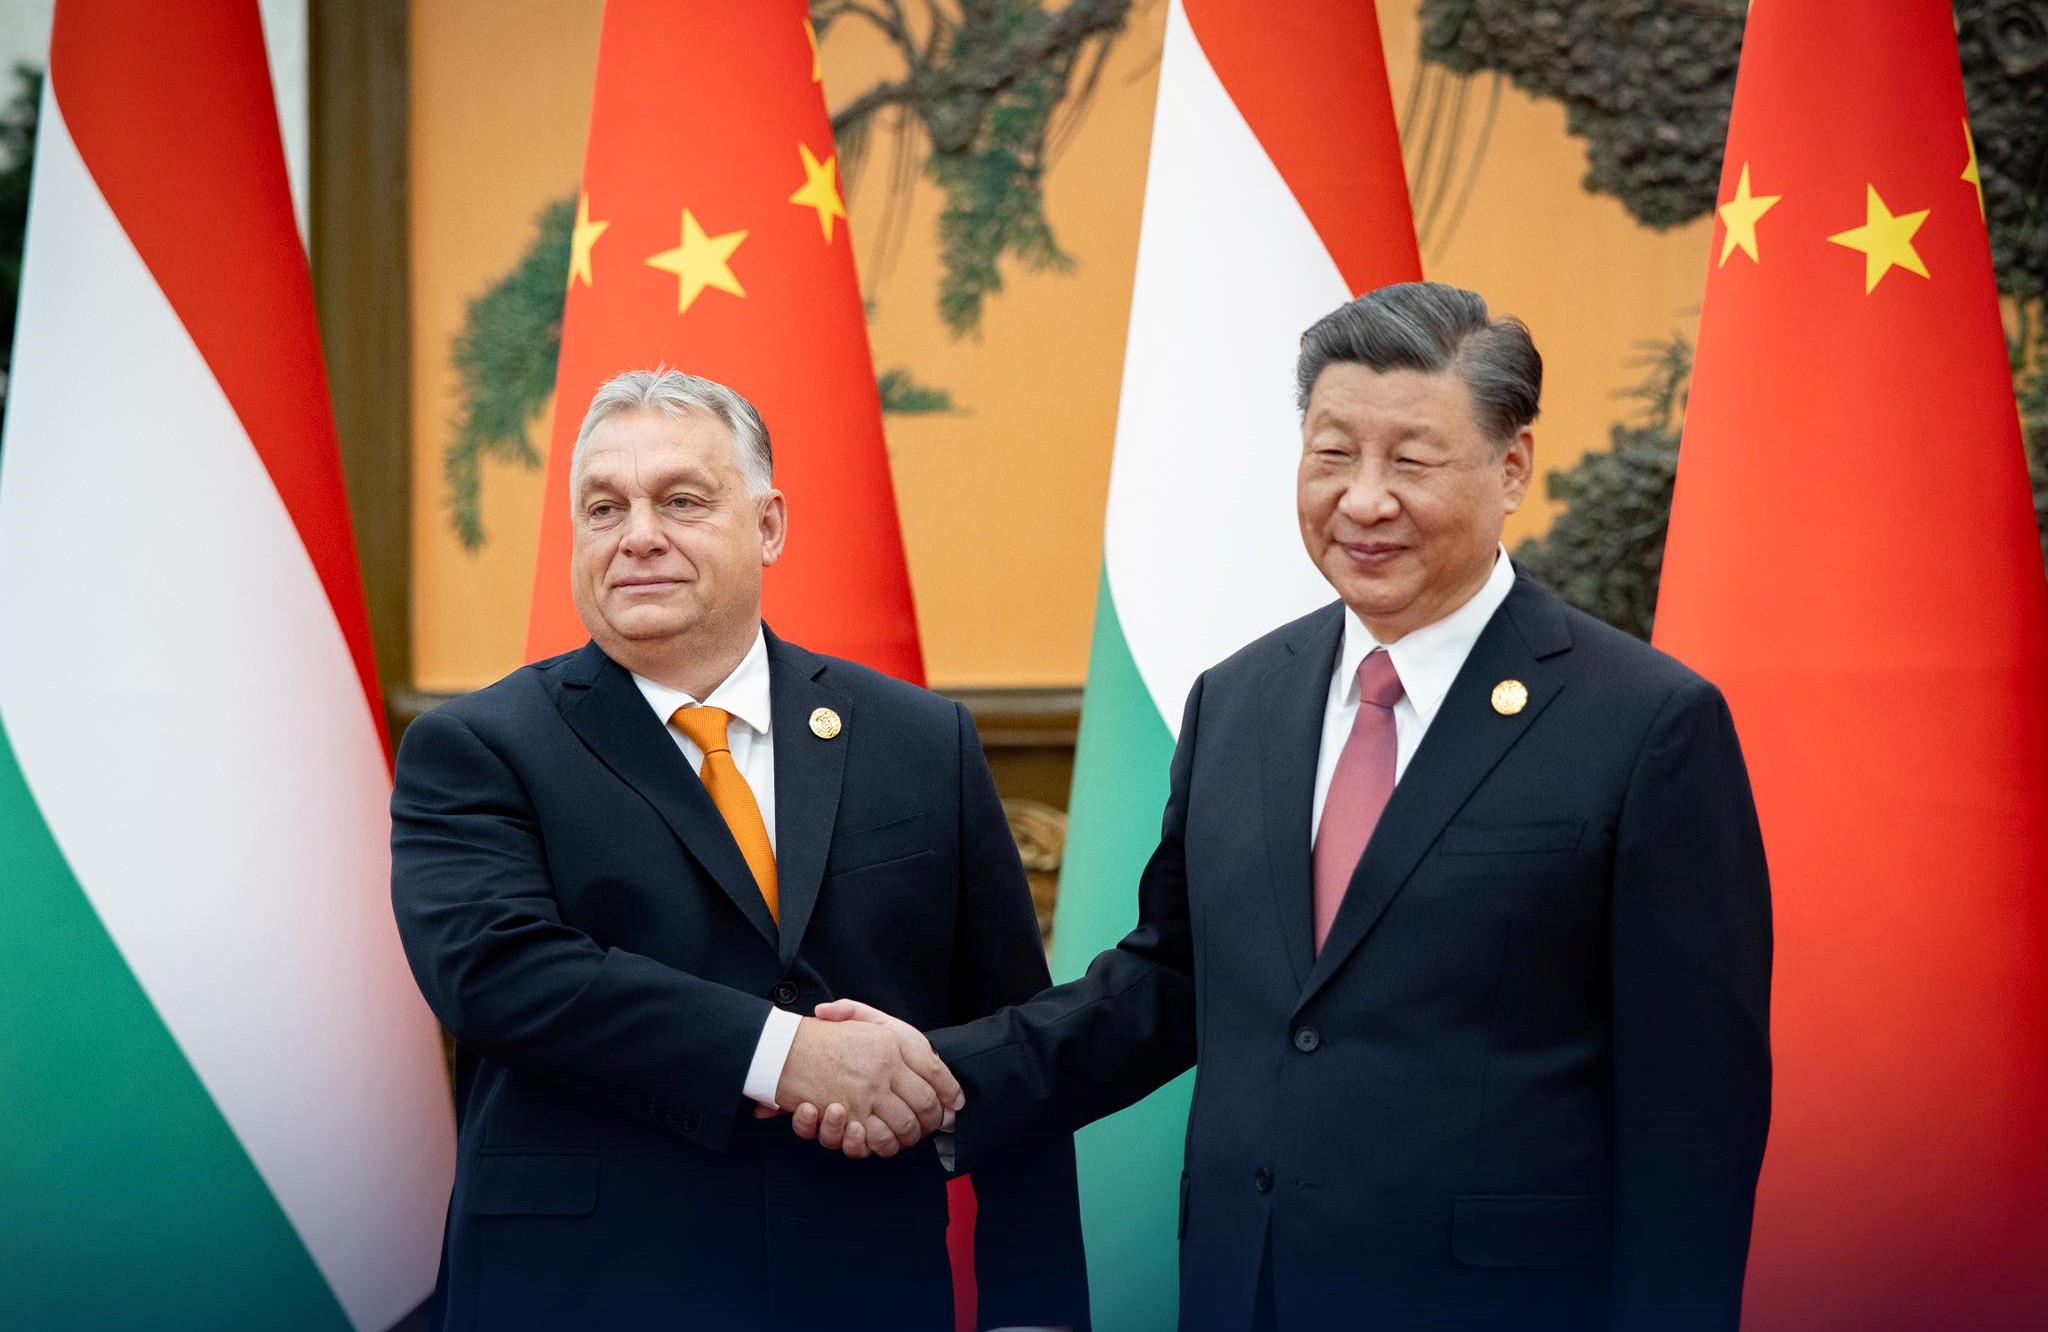 Significant Year to Come in Hungarian-Chinese Relations